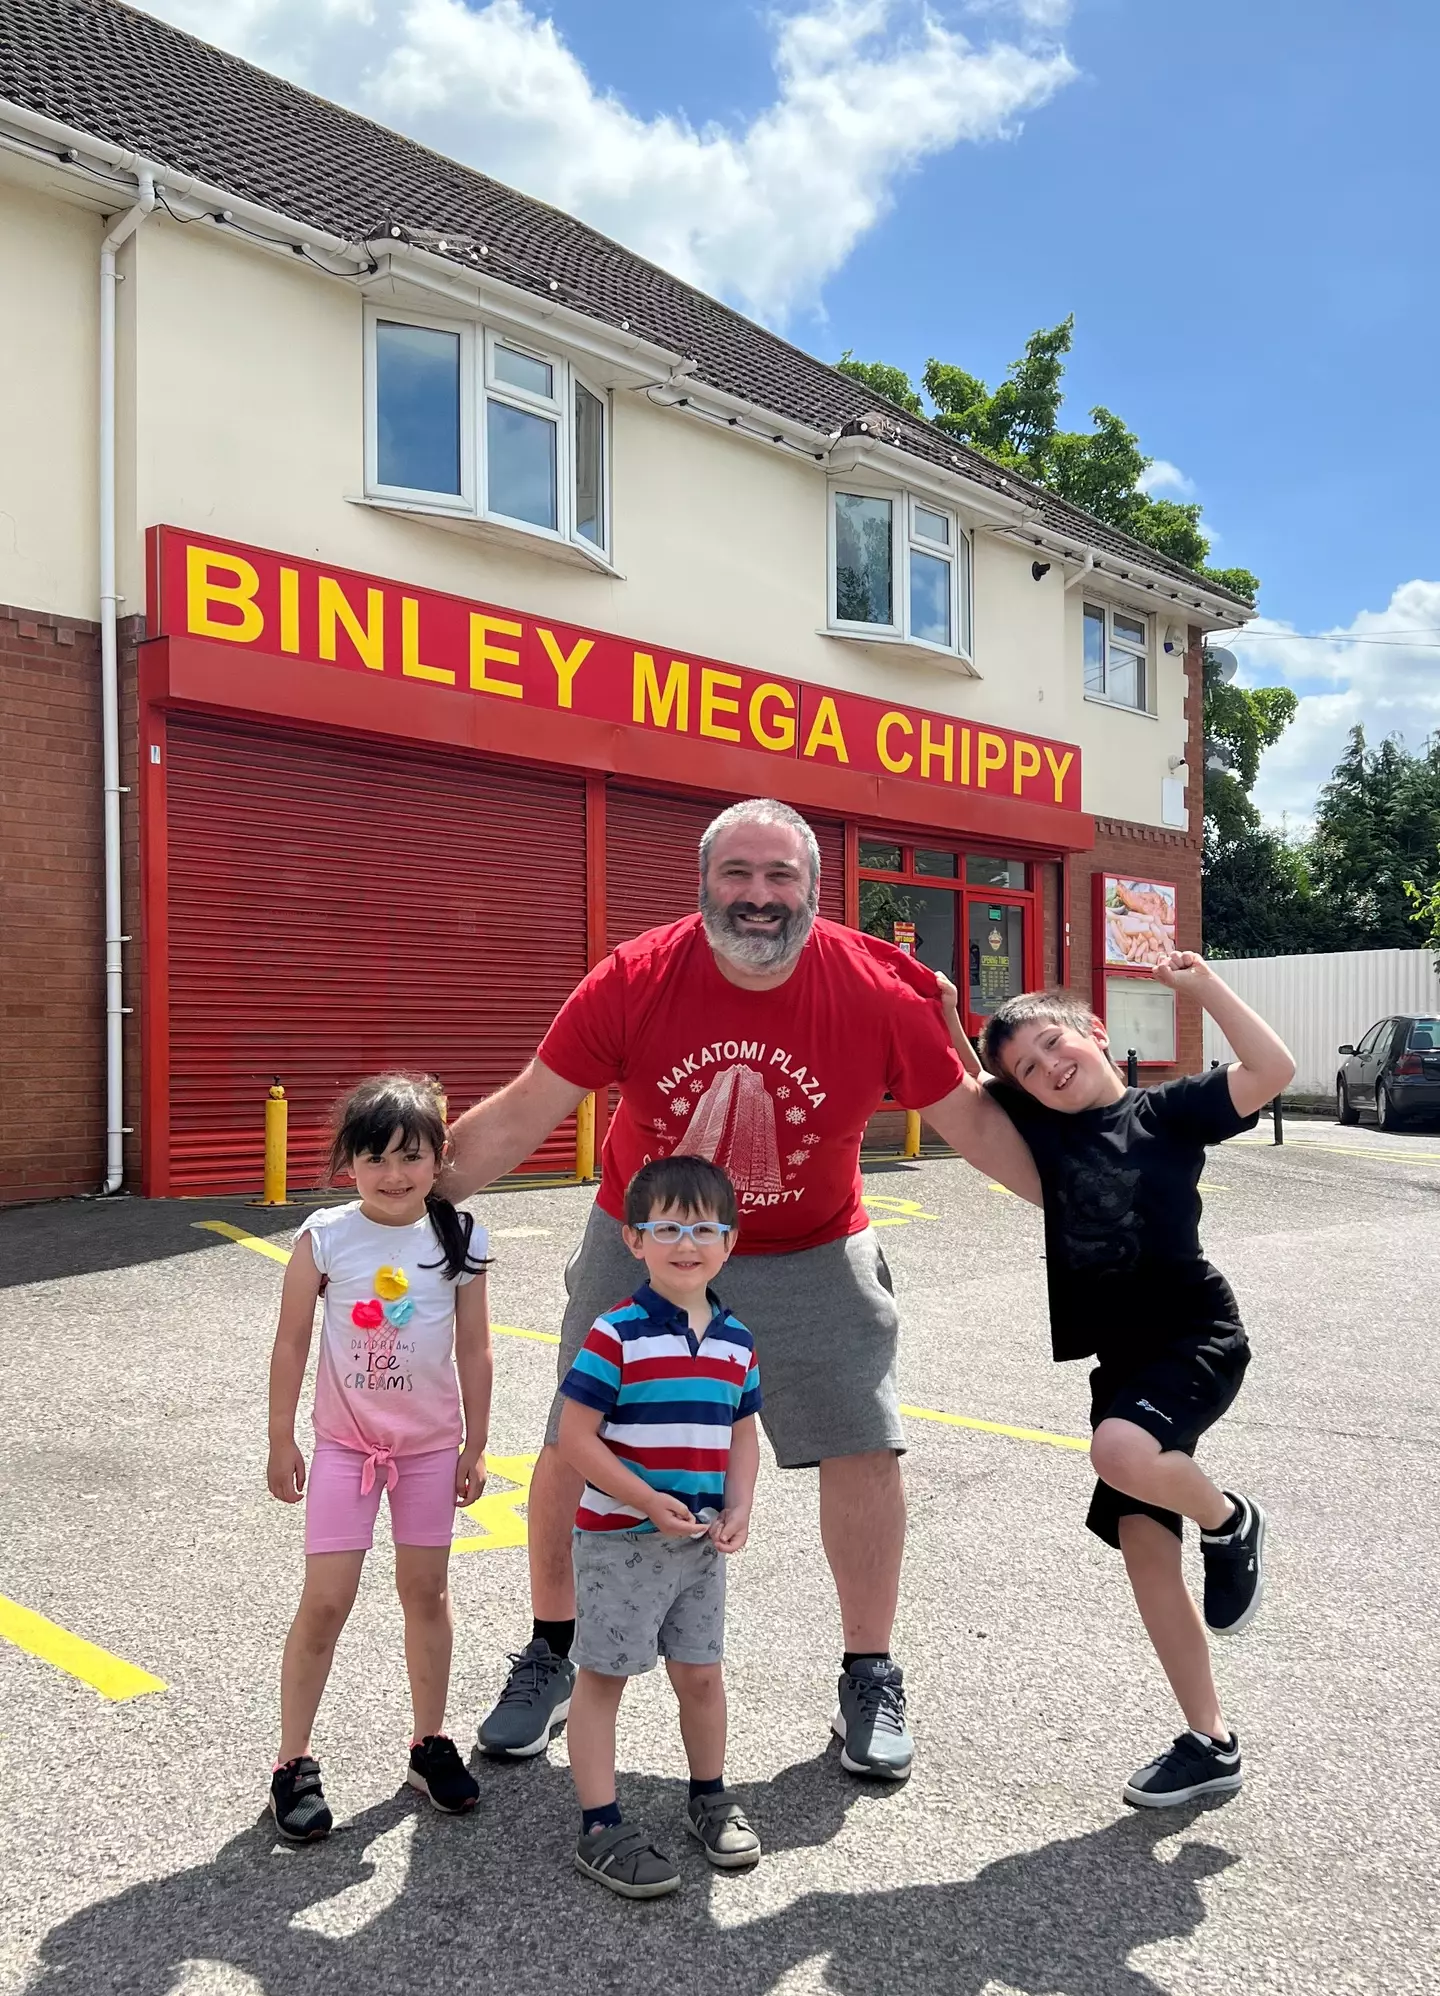 Simon Harris and his kids traveled more than 120 miles to experience the UK's most popular chippy.